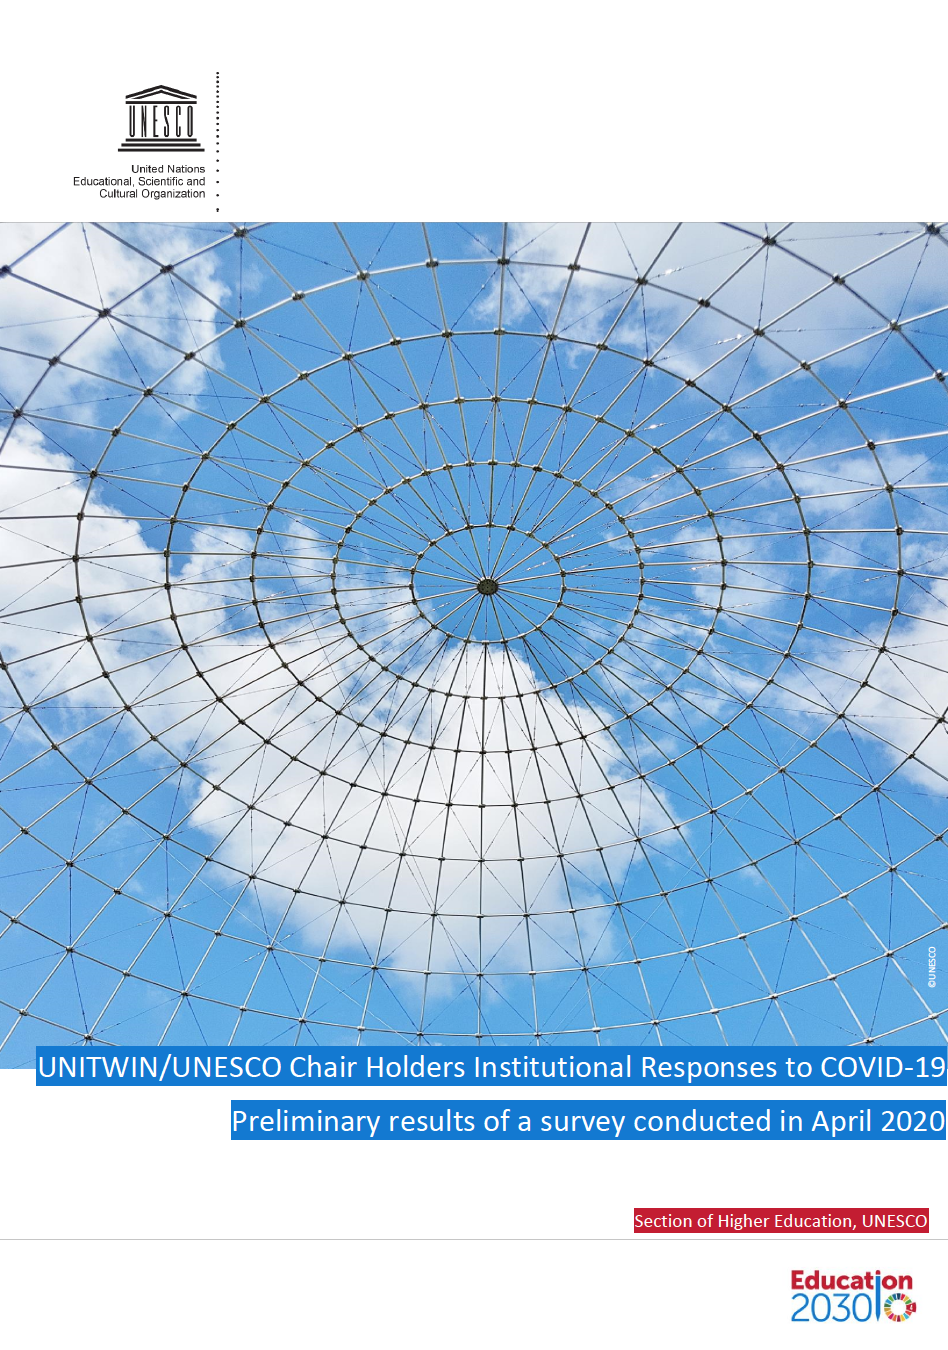 UNESCO UNITWIN/UNESCO Chair Holders Institutional Responses to COVID-19 Report:  Preliminary results of a survey conducted in April 2020